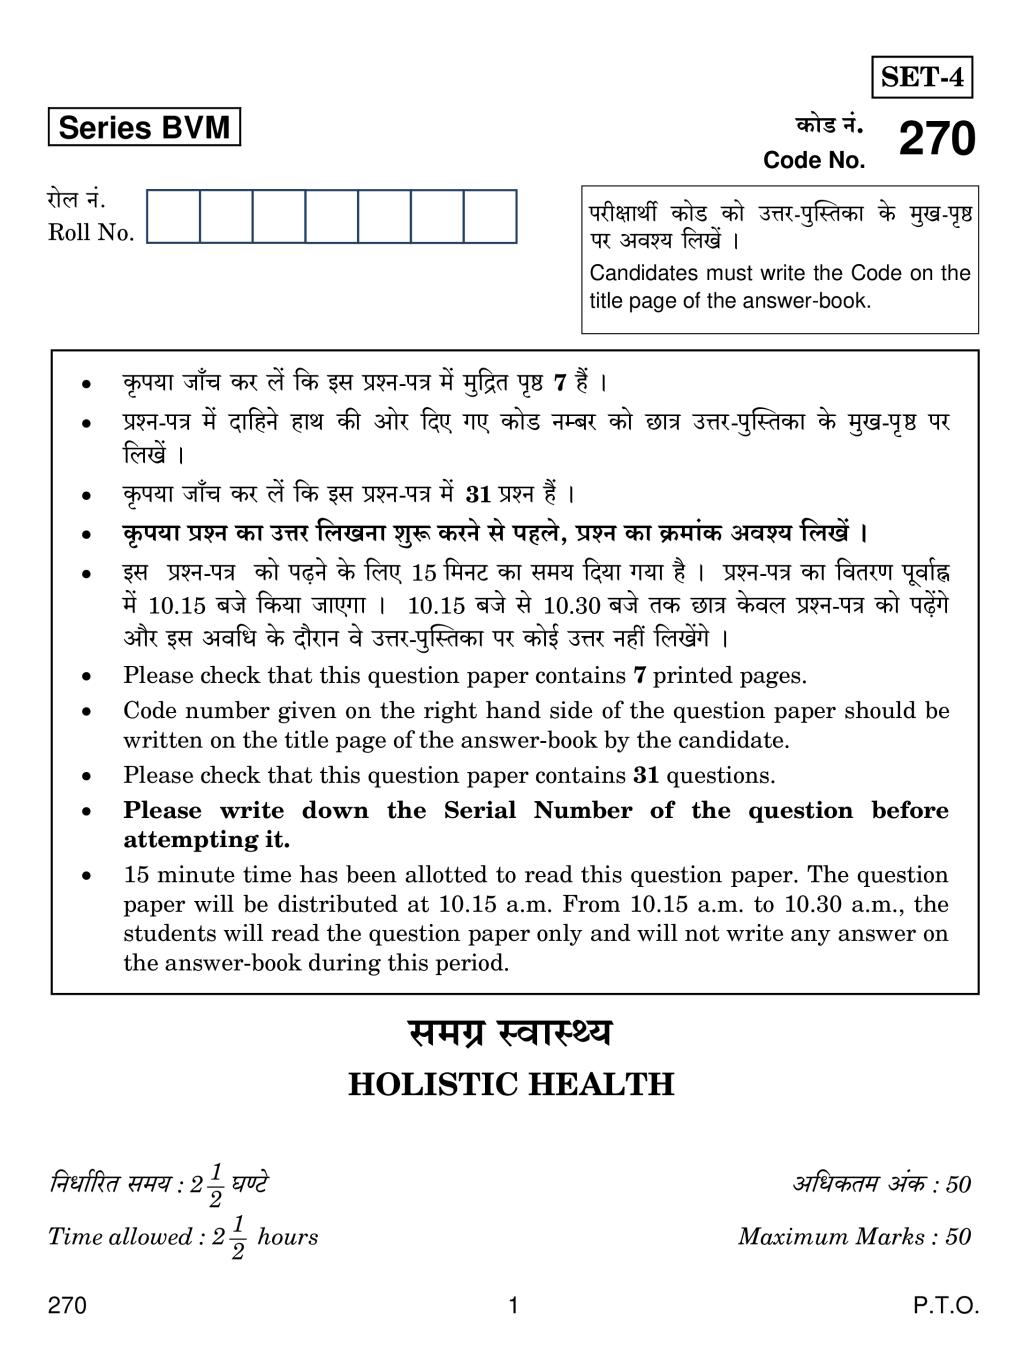 CBSE Class 12 Holistic Health Question Paper 2019 - Page 1